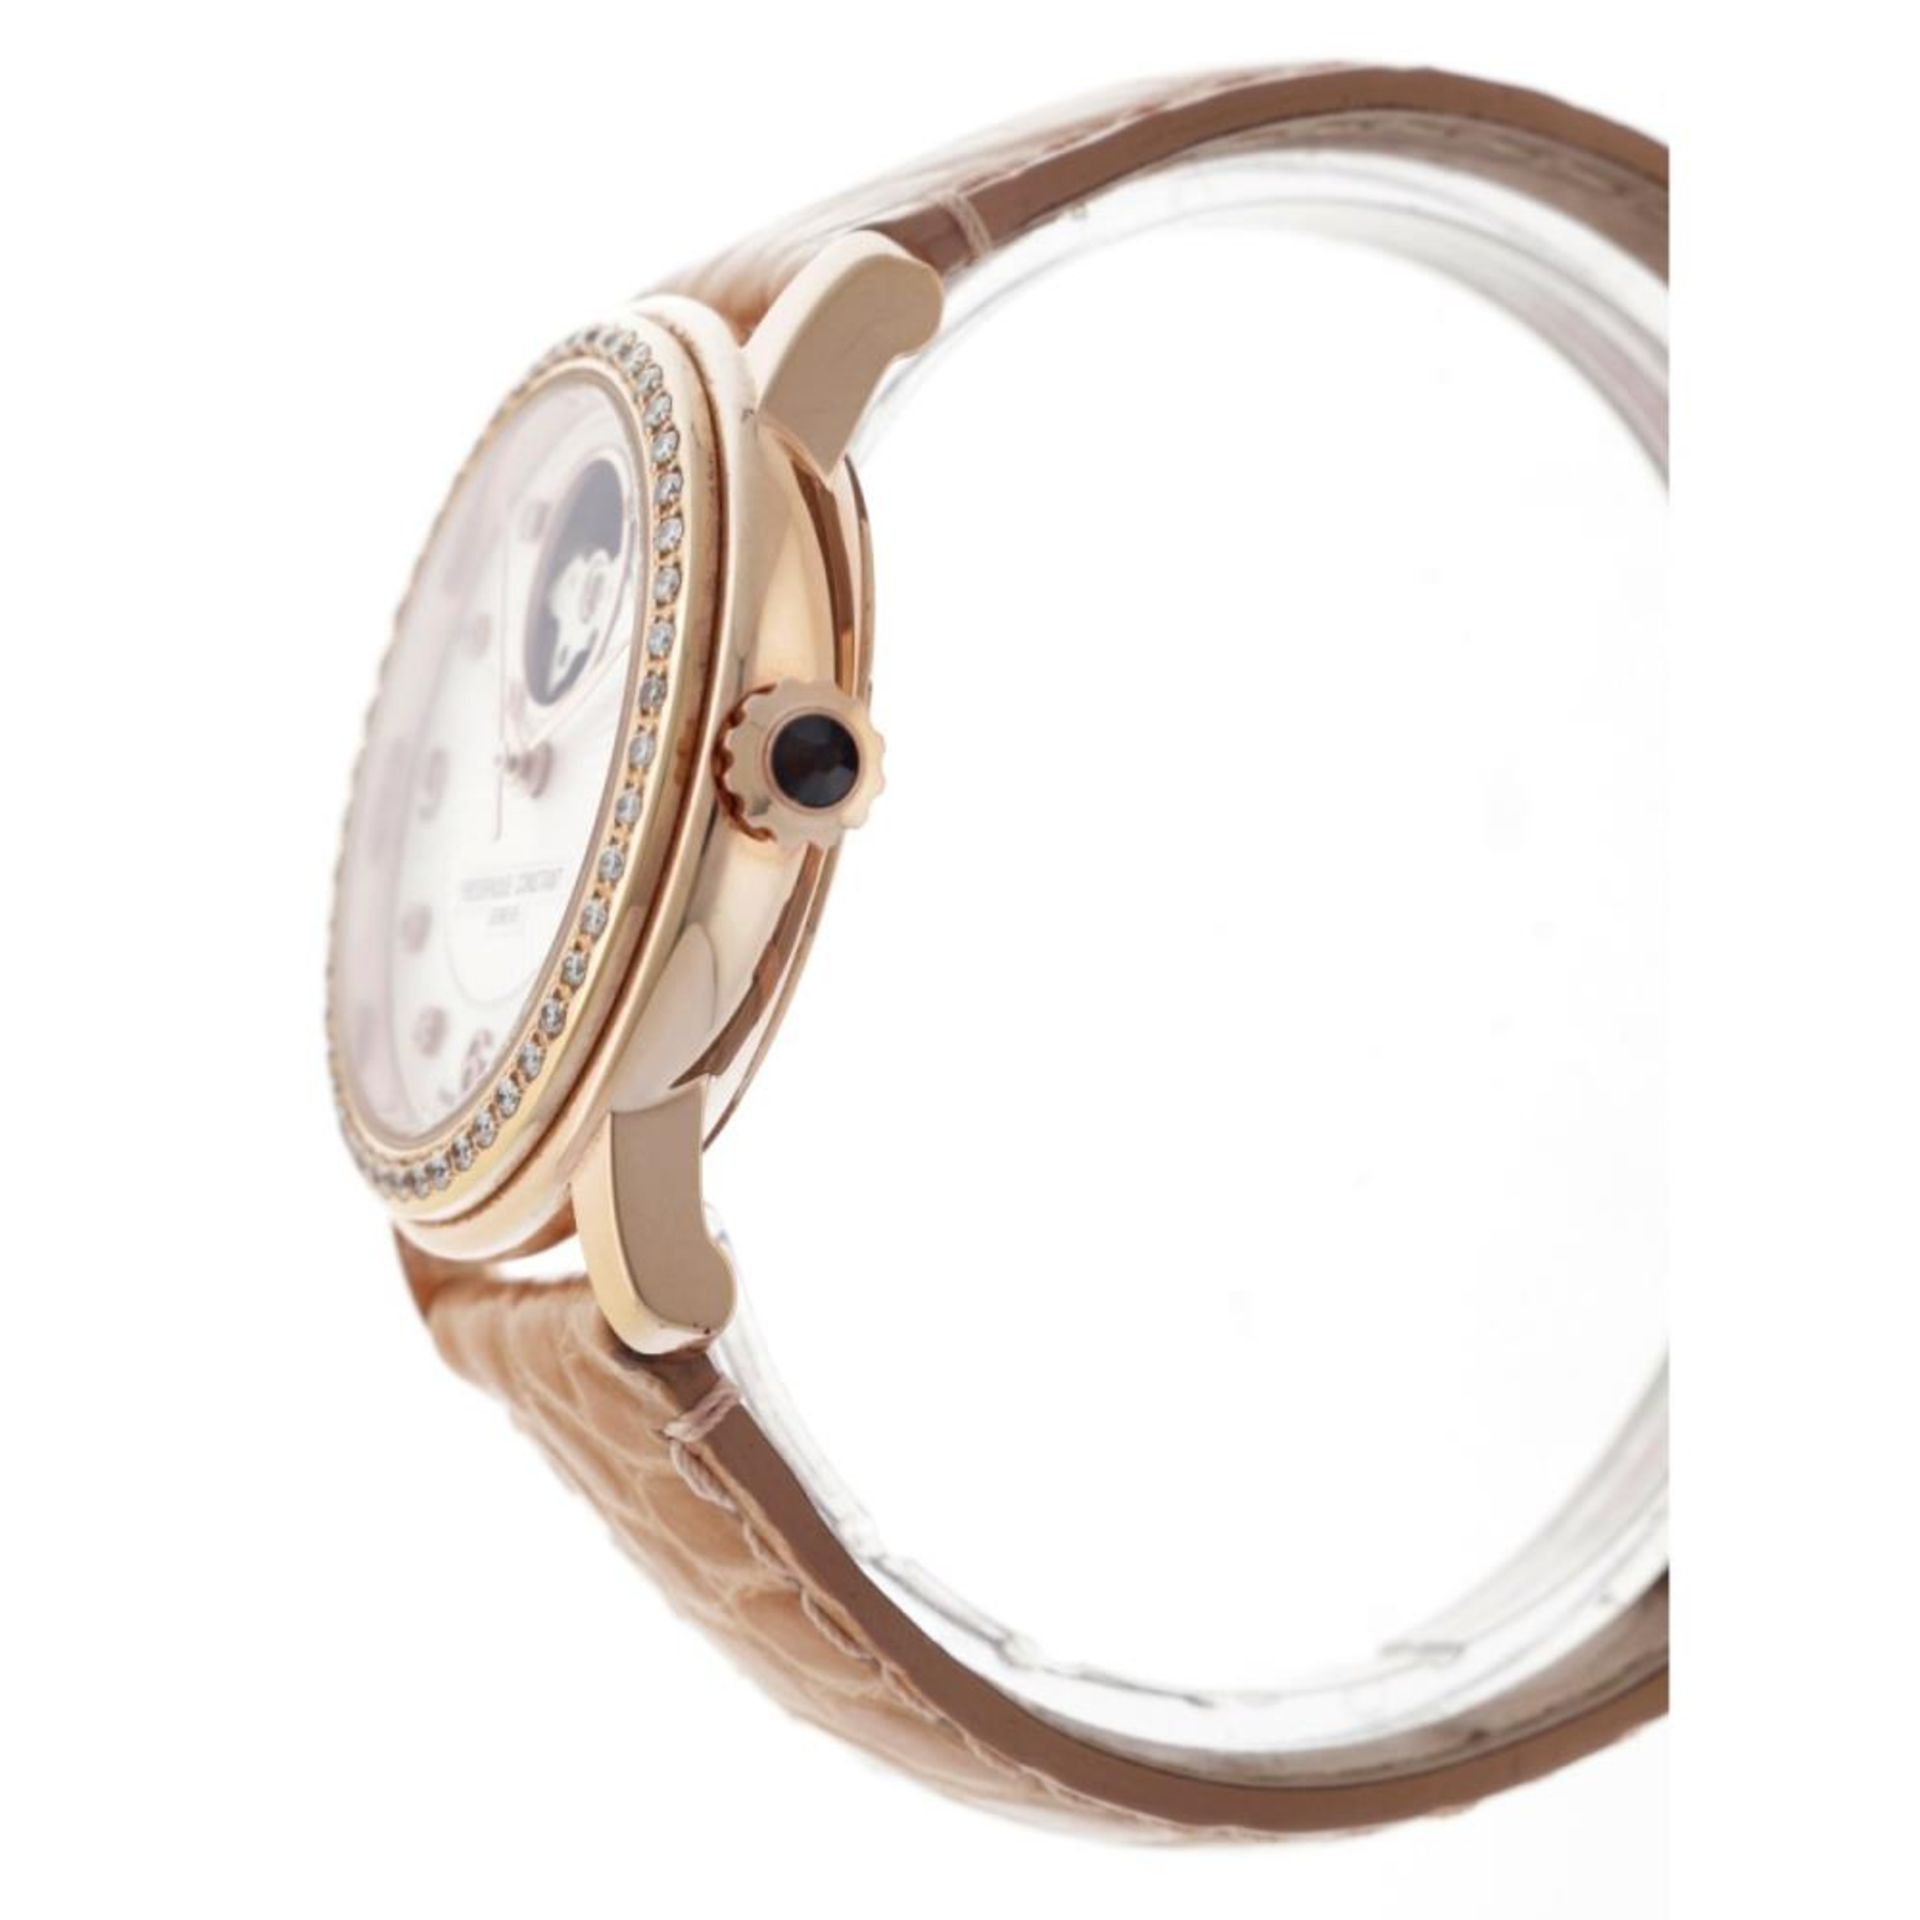 Frédérique Constant Heart Beat - Mother of Pearl & Diamond - FC-303/310X2PD22 - Ladies watch - appro - Image 9 of 10